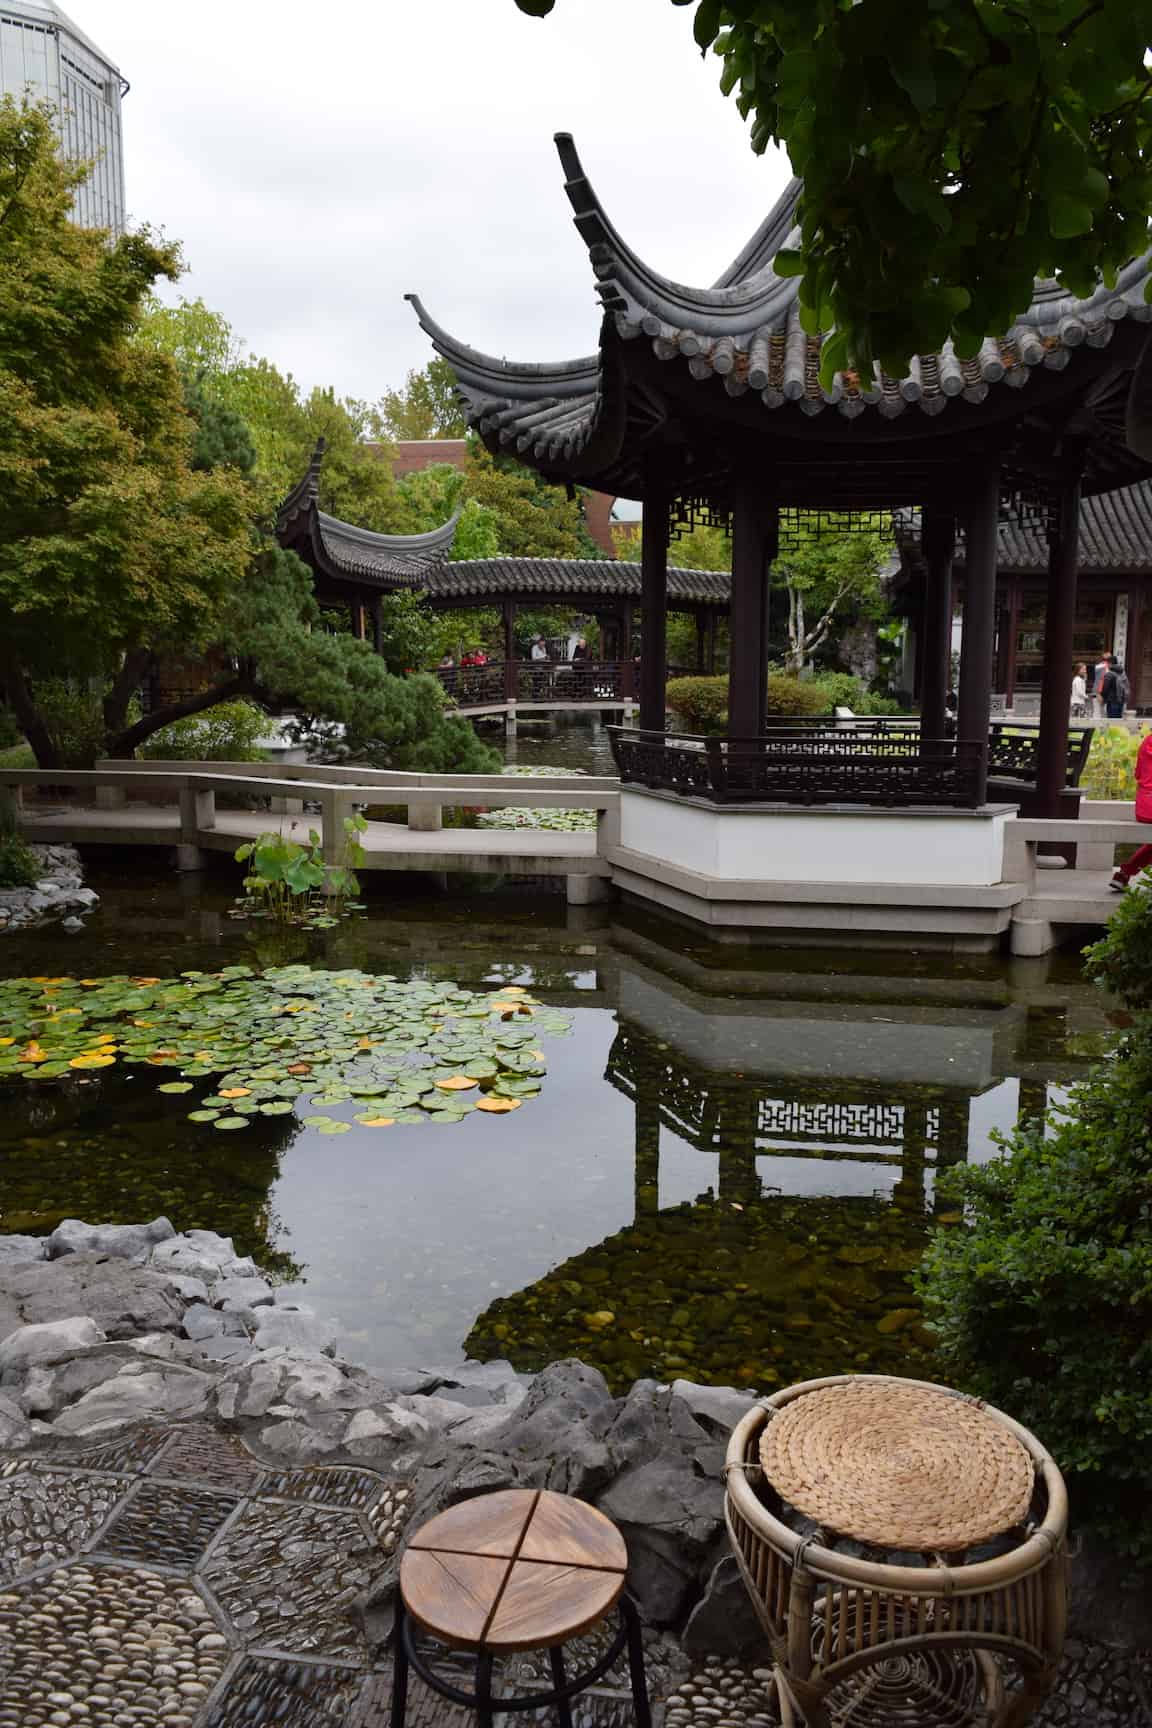 Planning Oregon travel? The Lan Su Chinese Garden in downtown Portland is a must-add to your Portland itinerary. It's off the beaten path and gorgeous! Near the Portland Chinatown, don't miss this hidden gem.